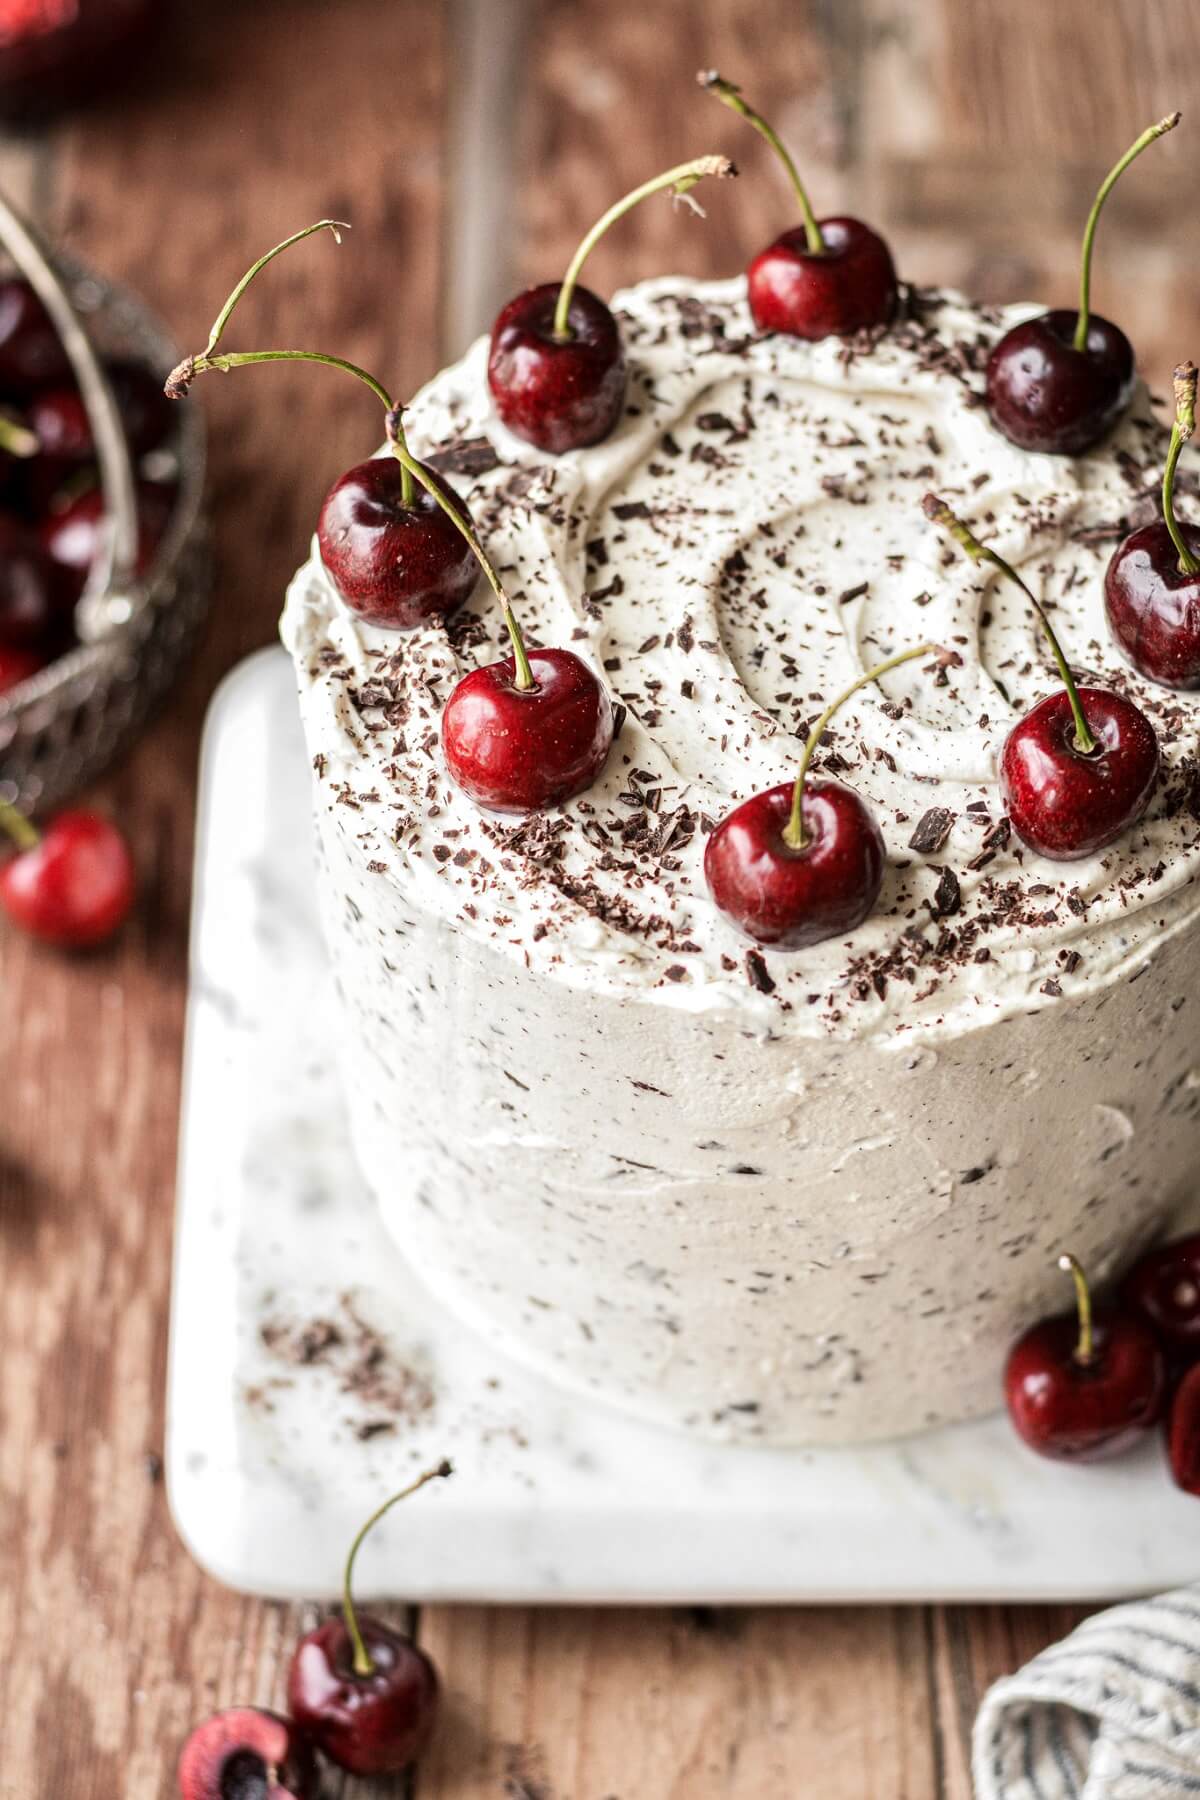 Cherries on top of a white forest cake.